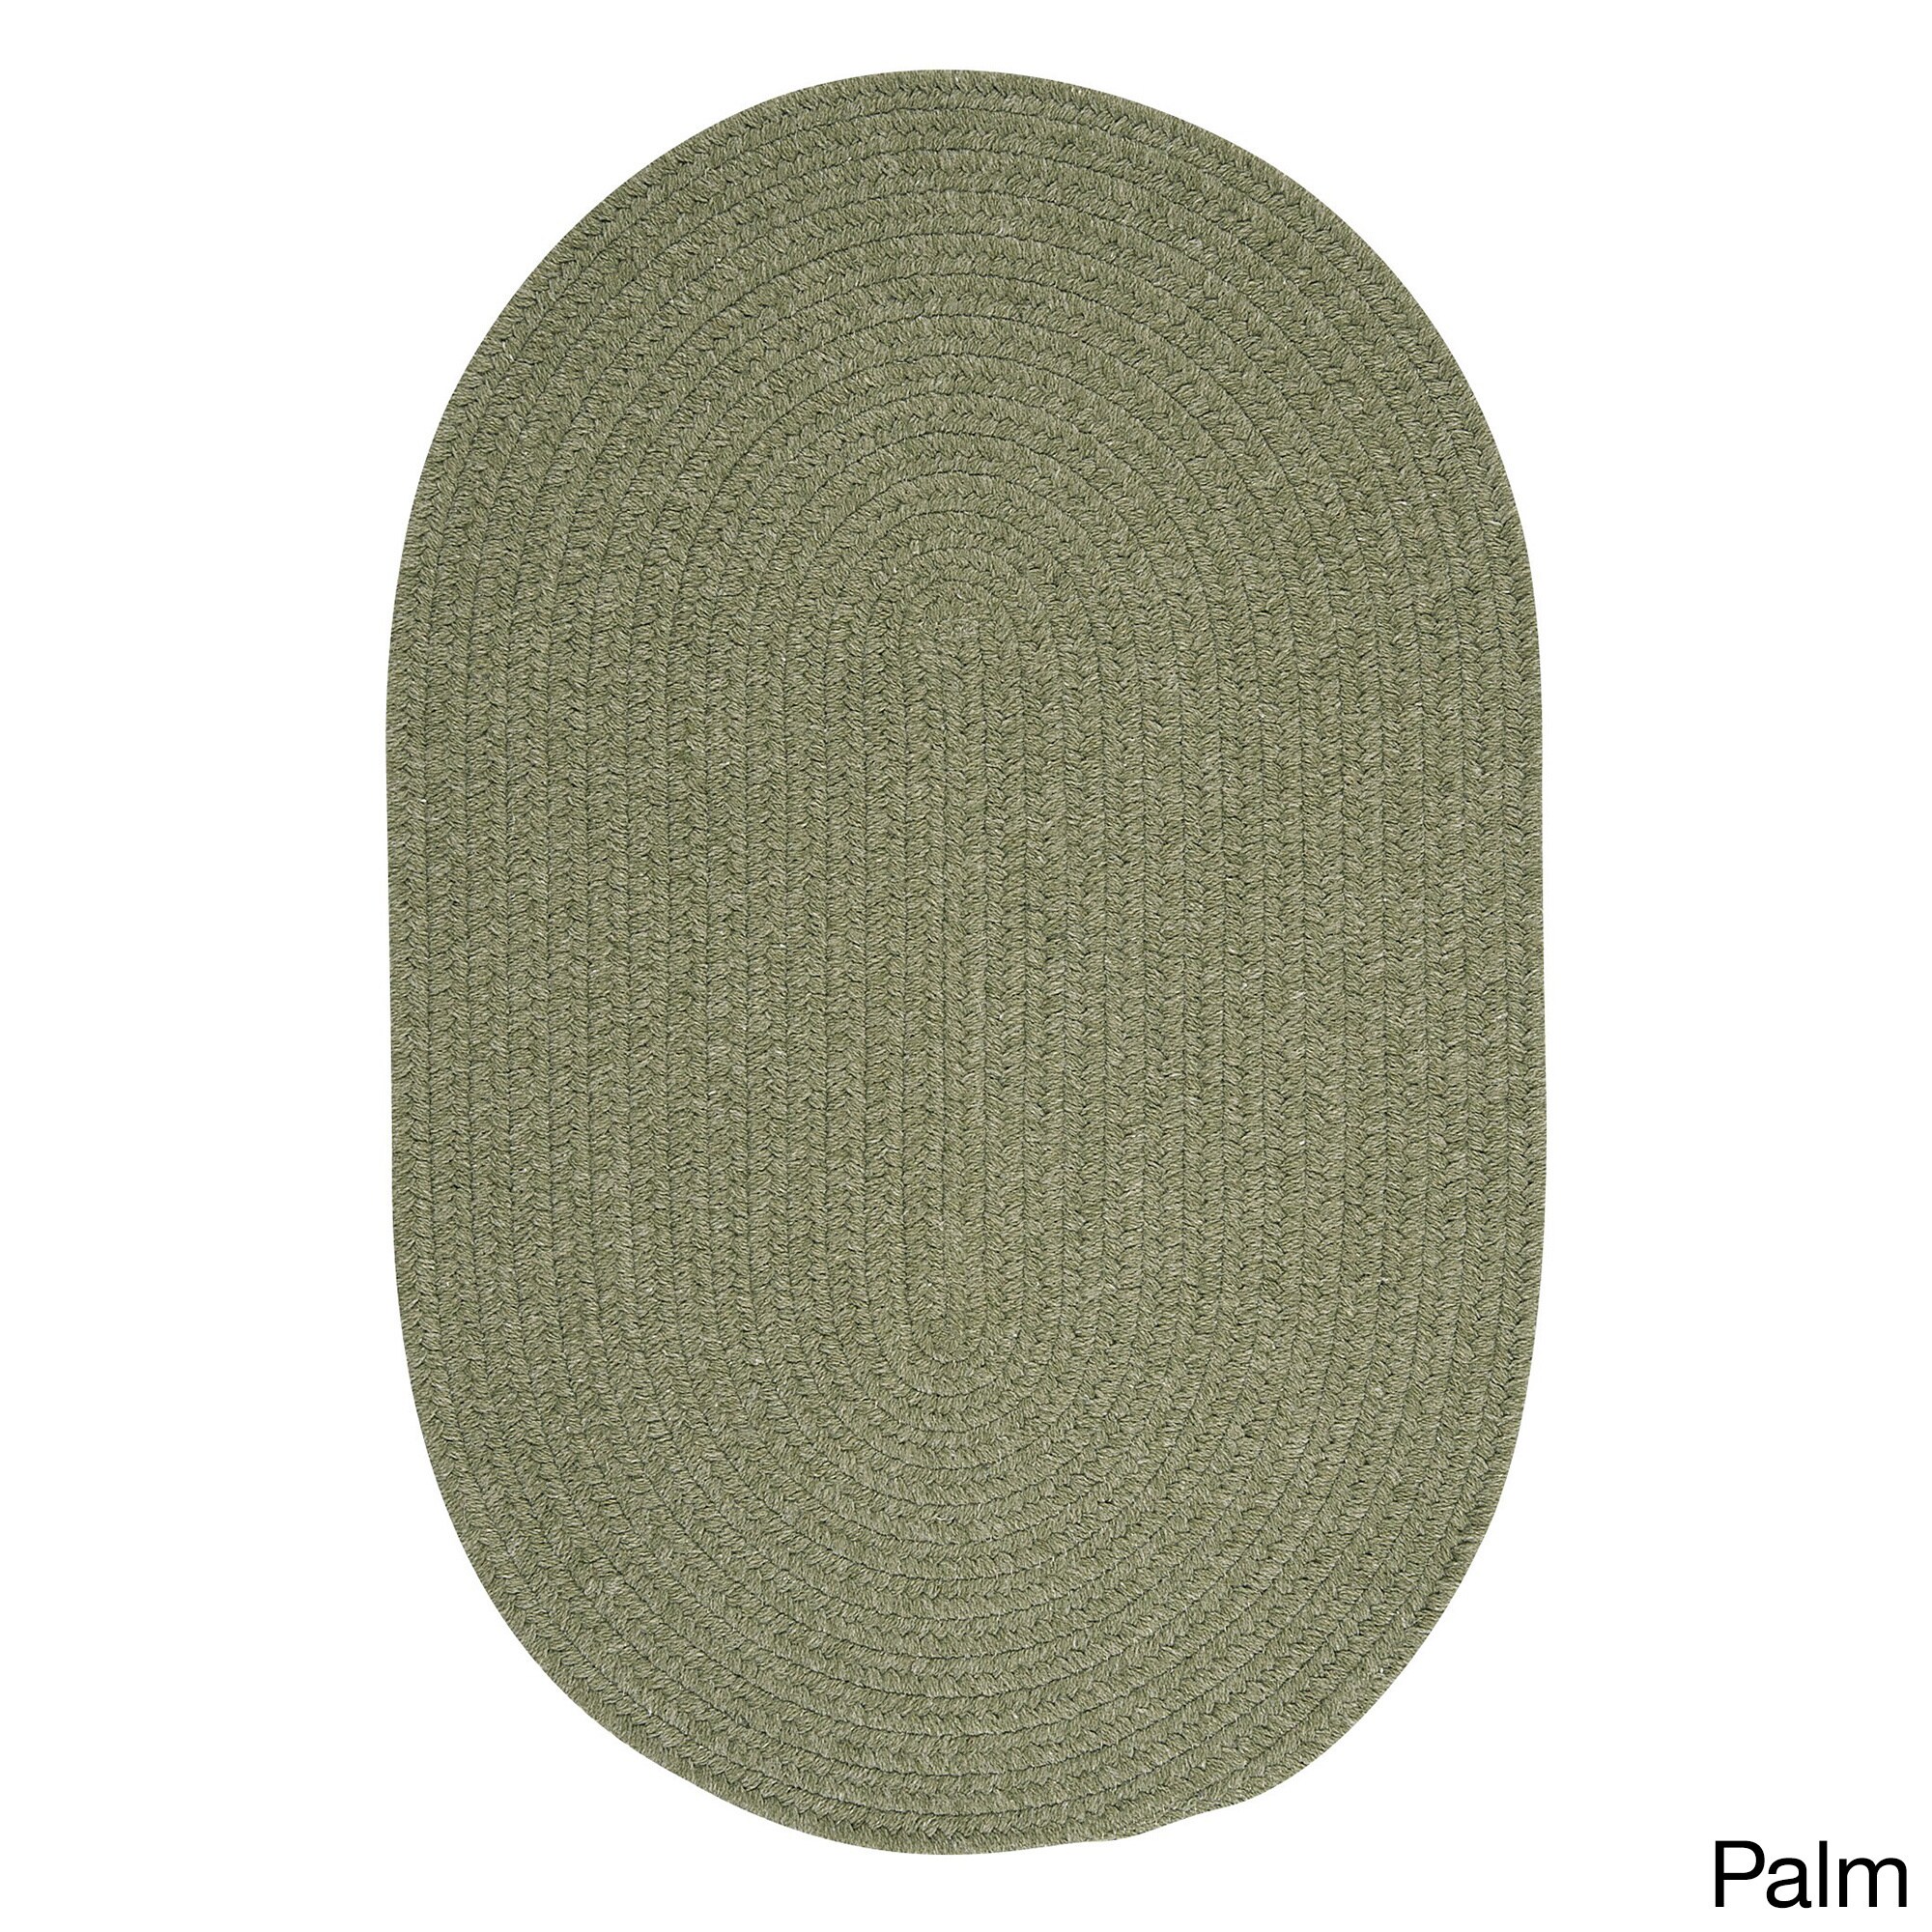 Colonial Mills Charleston Braided Wool blend Area Rug (8 X 10) Green Size 8 x 10